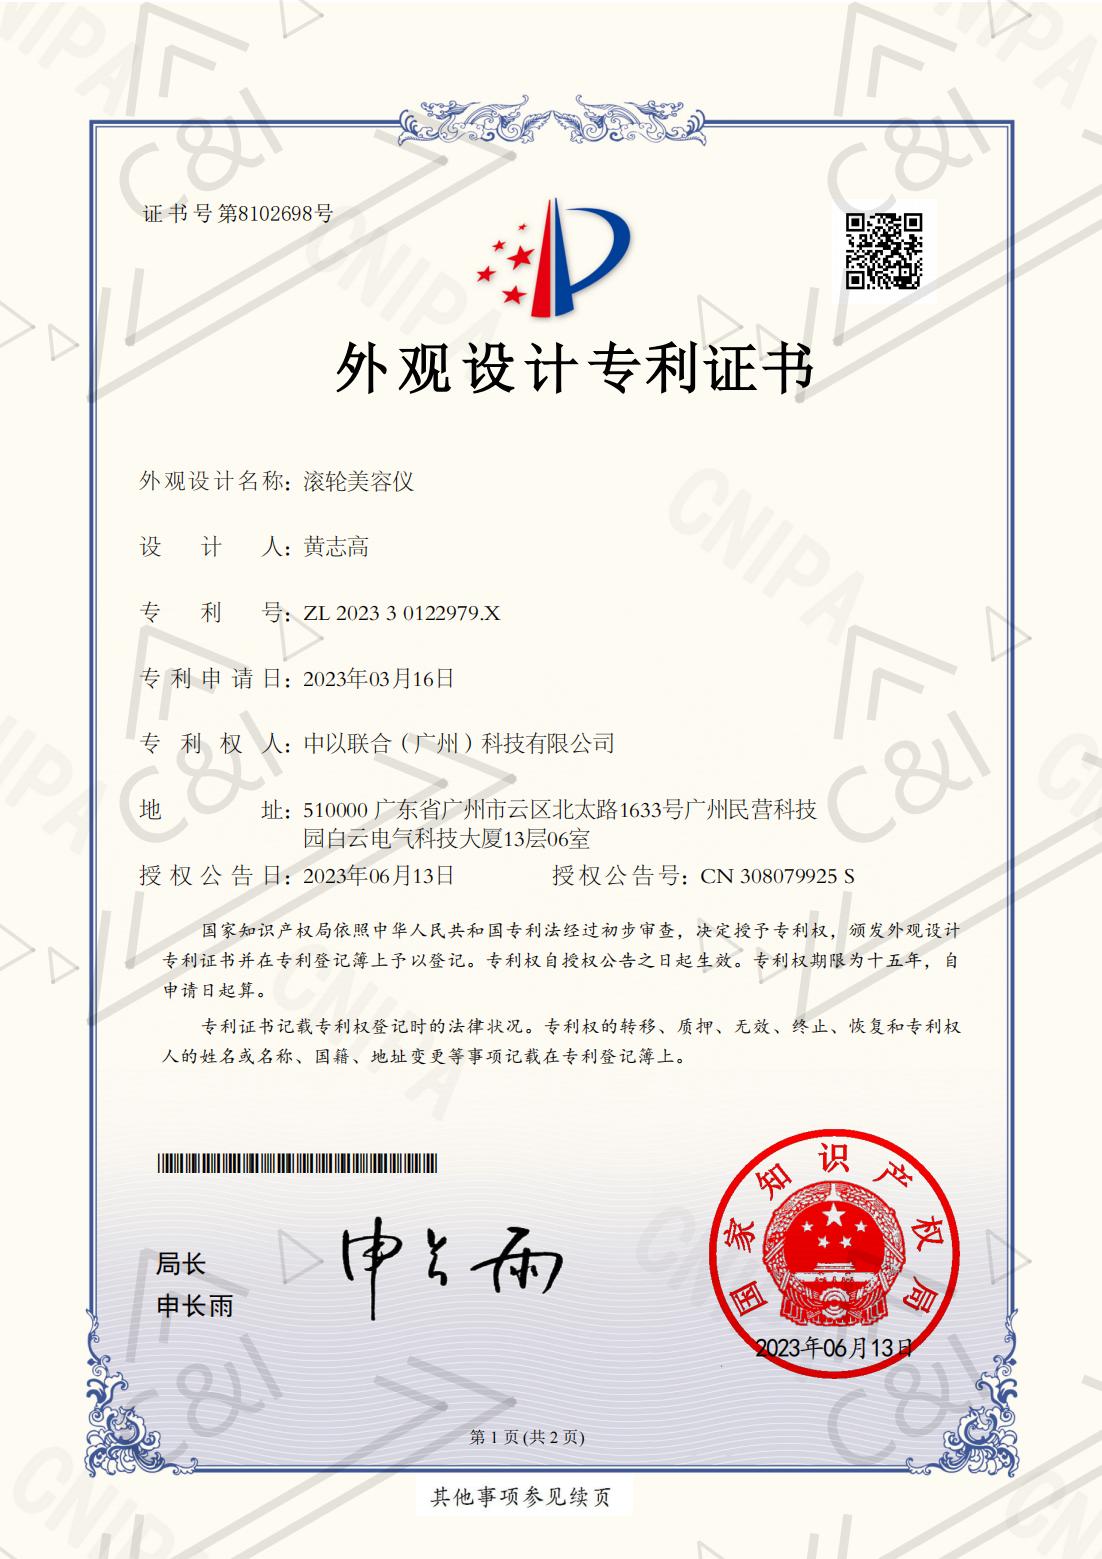 Appearance Patent Certificate-1